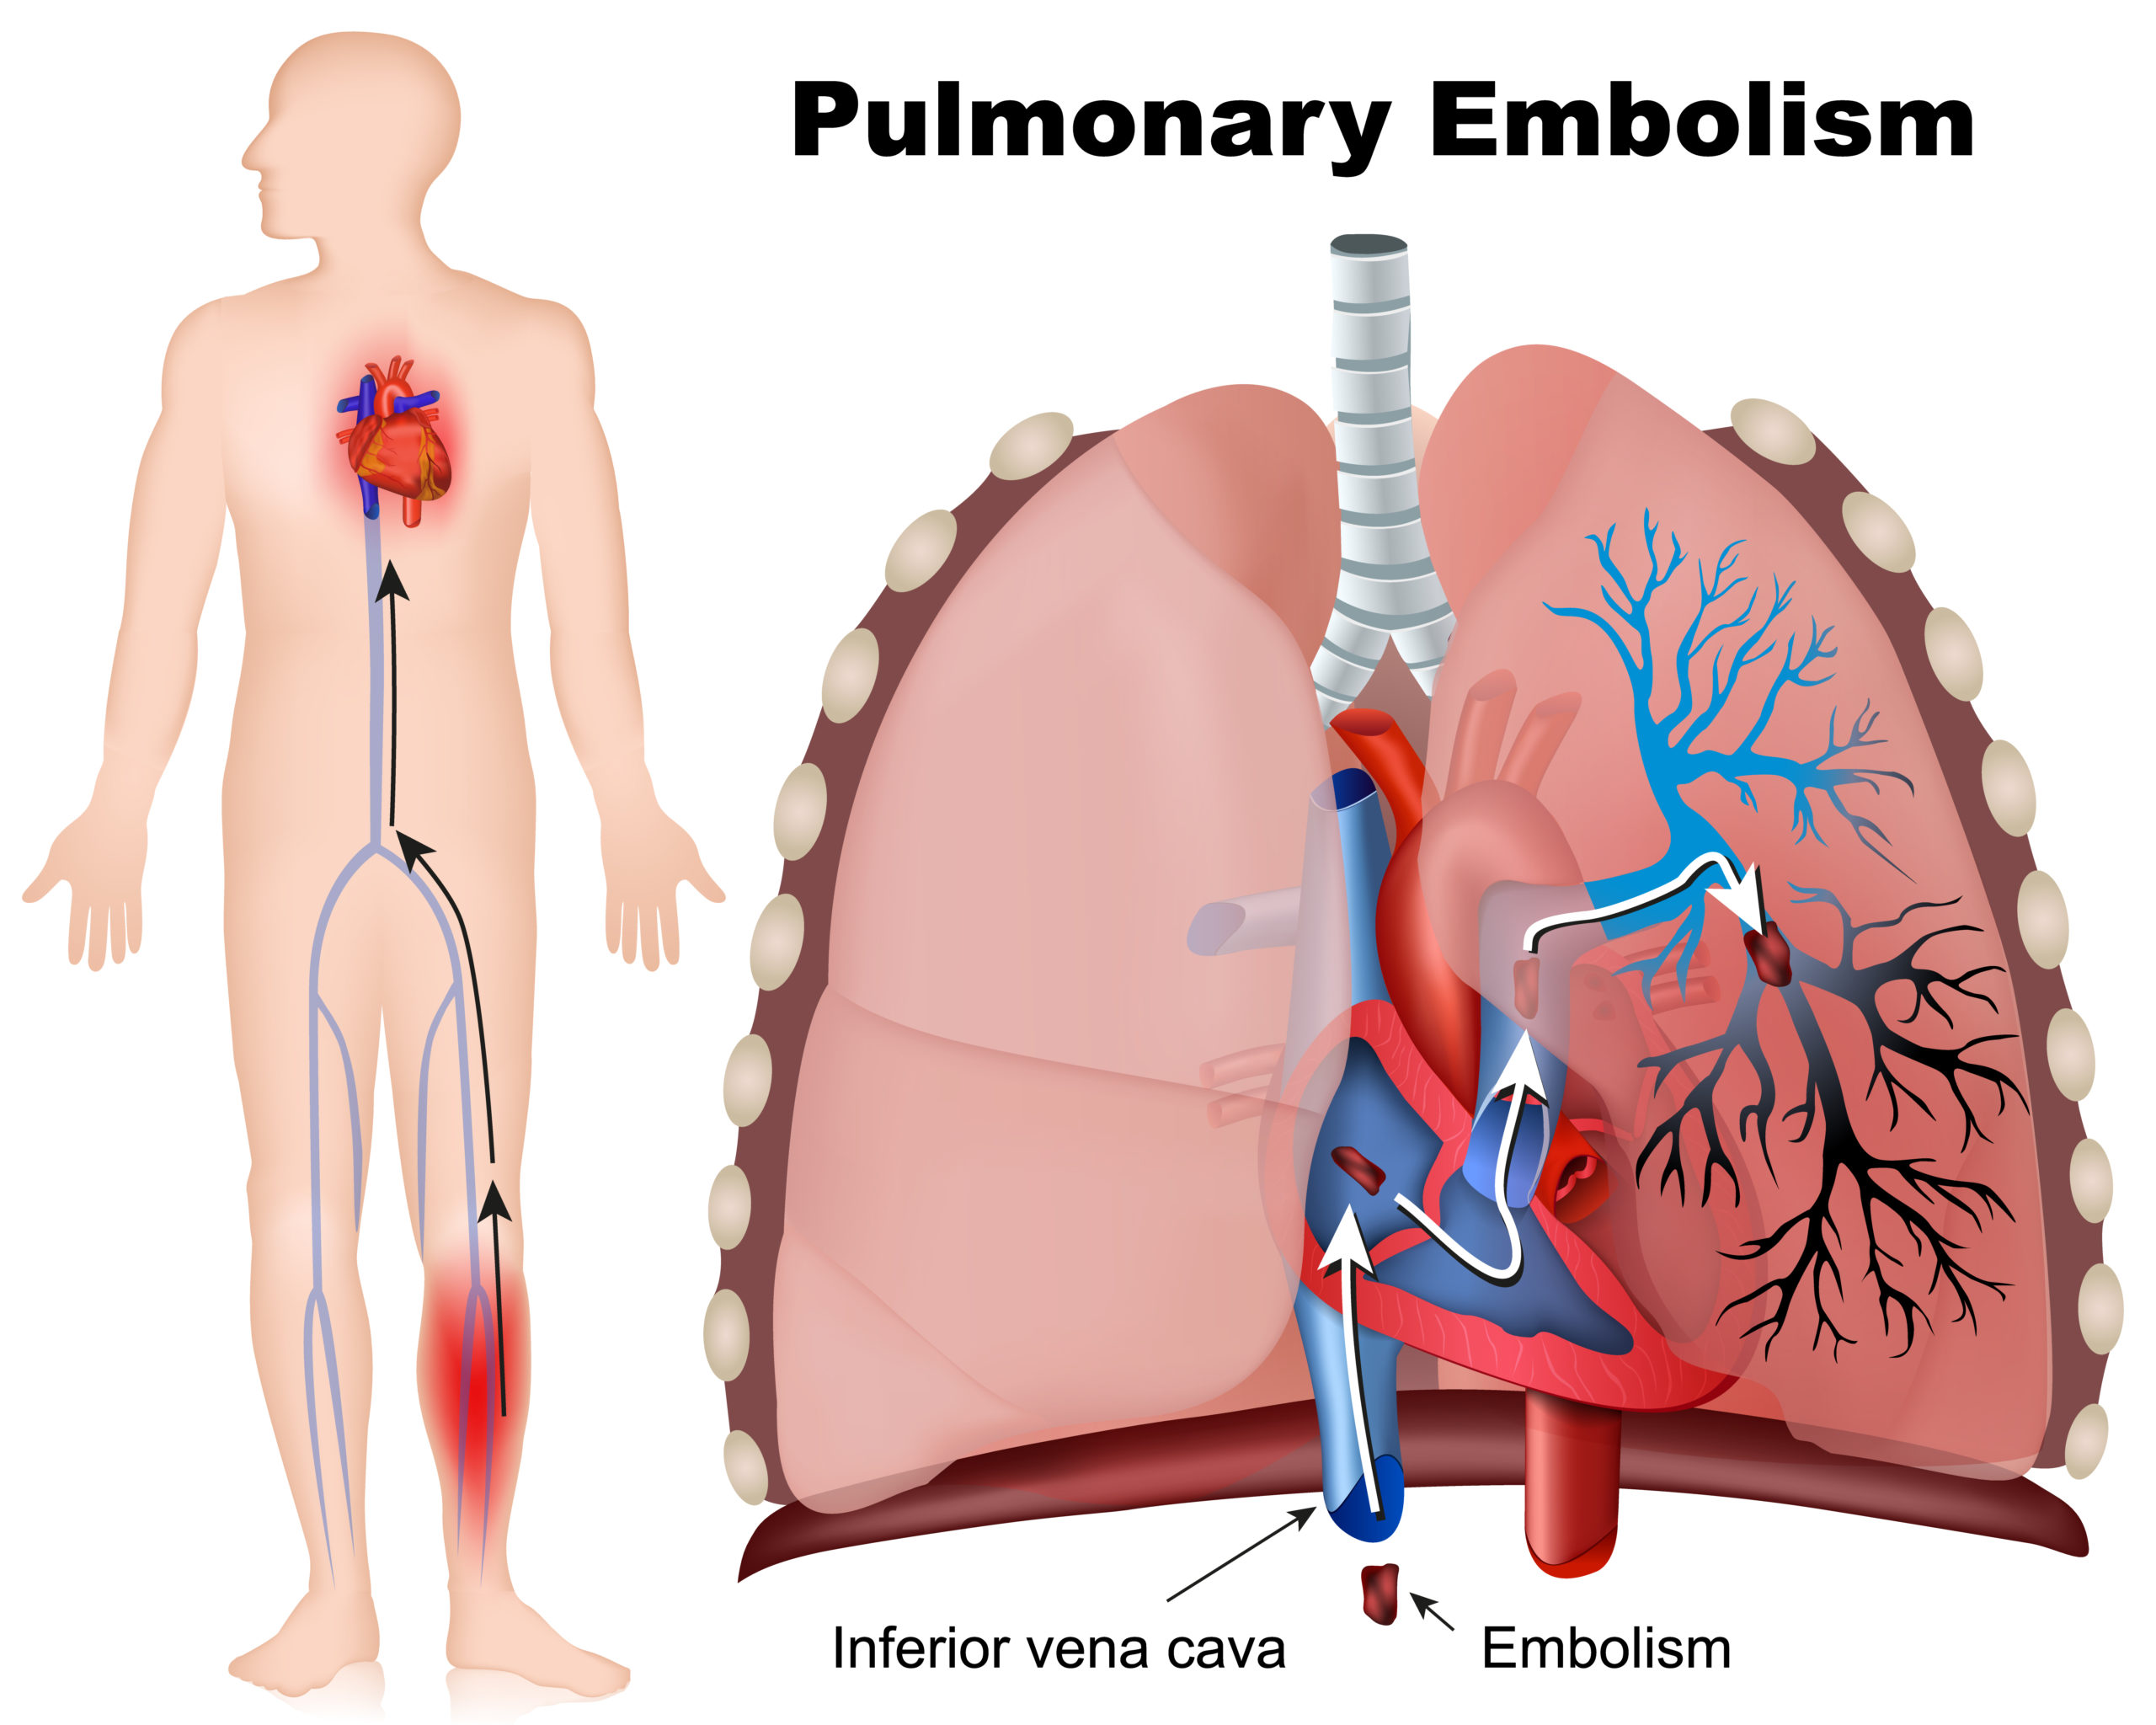 Predictive Model for Pulmonary Embolism Risk in Lung Cancer